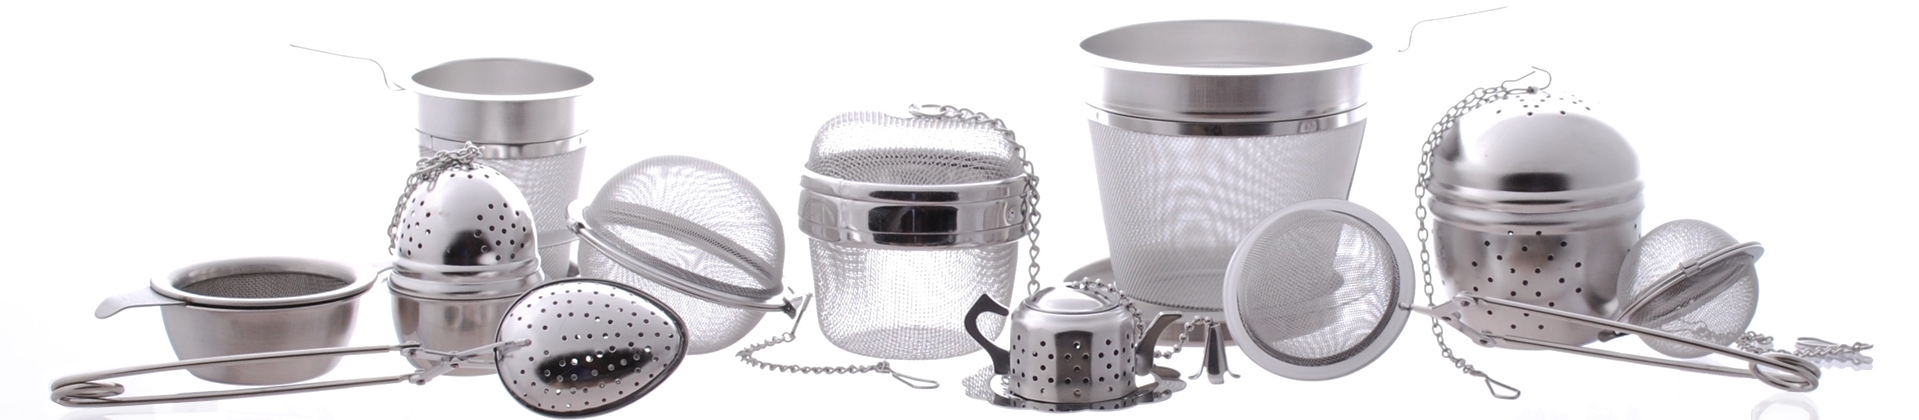 Tea Infusers, Strainers & Filters - Ronnefeldt